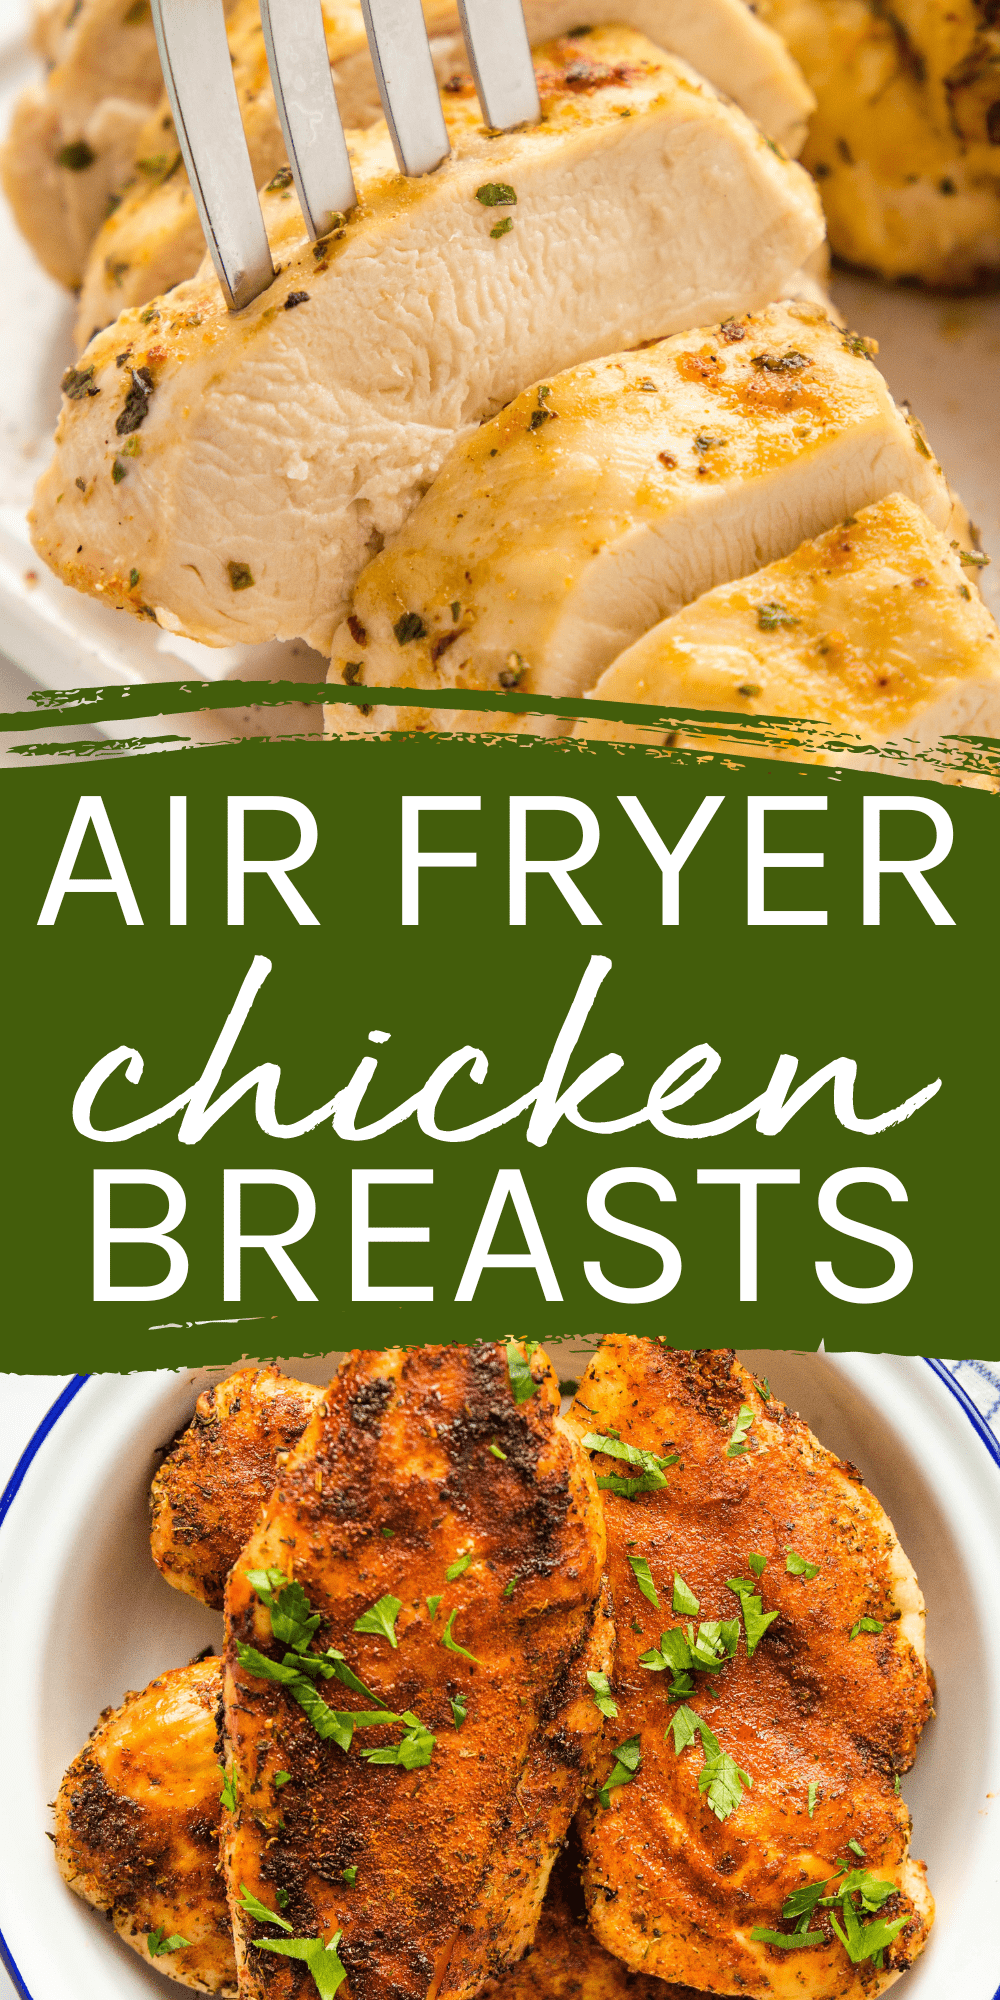 This Air Fryer Chicken Breast recipe is a delicious and easy main dish. Juicy chicken breasts seasoned with simple flavours and cooked to perfection from fresh or frozen in 20 minutes or less. Recipe from thebusybaker.ca! #airfryerchickenbreast #airfryerchickenbreasts #airfryerrecipe #chickenbreasts #chicken #airfryerchicken #easymeal #healthyprotein #chickenbreast via @busybakerblog